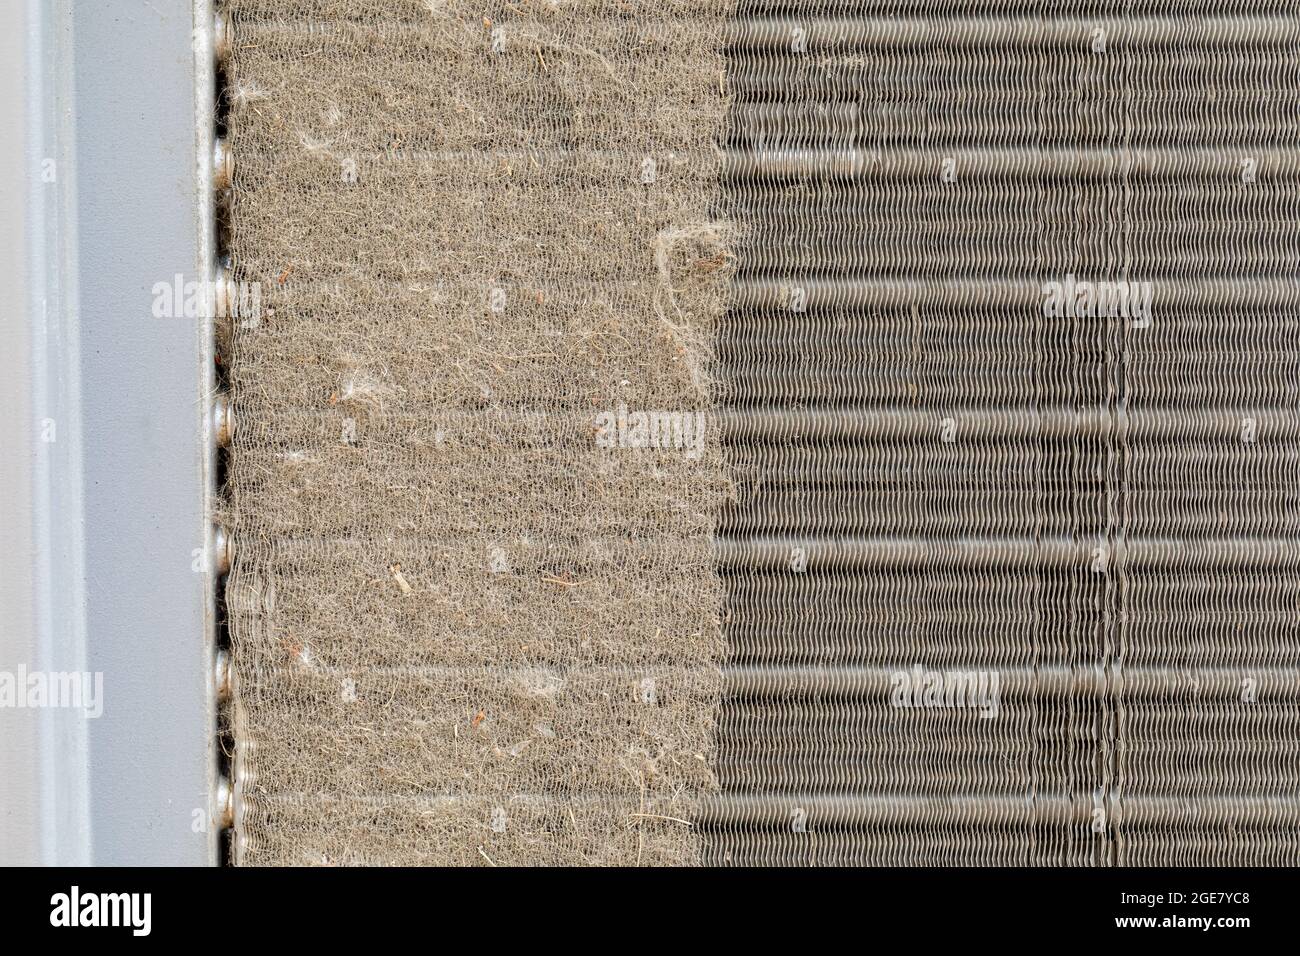 Dirty air conditioning unit. Condenser coil full of dirt and grass debris. Concept of home air conditioning, hvac, repair, service, cleaning and maint Stock Photo